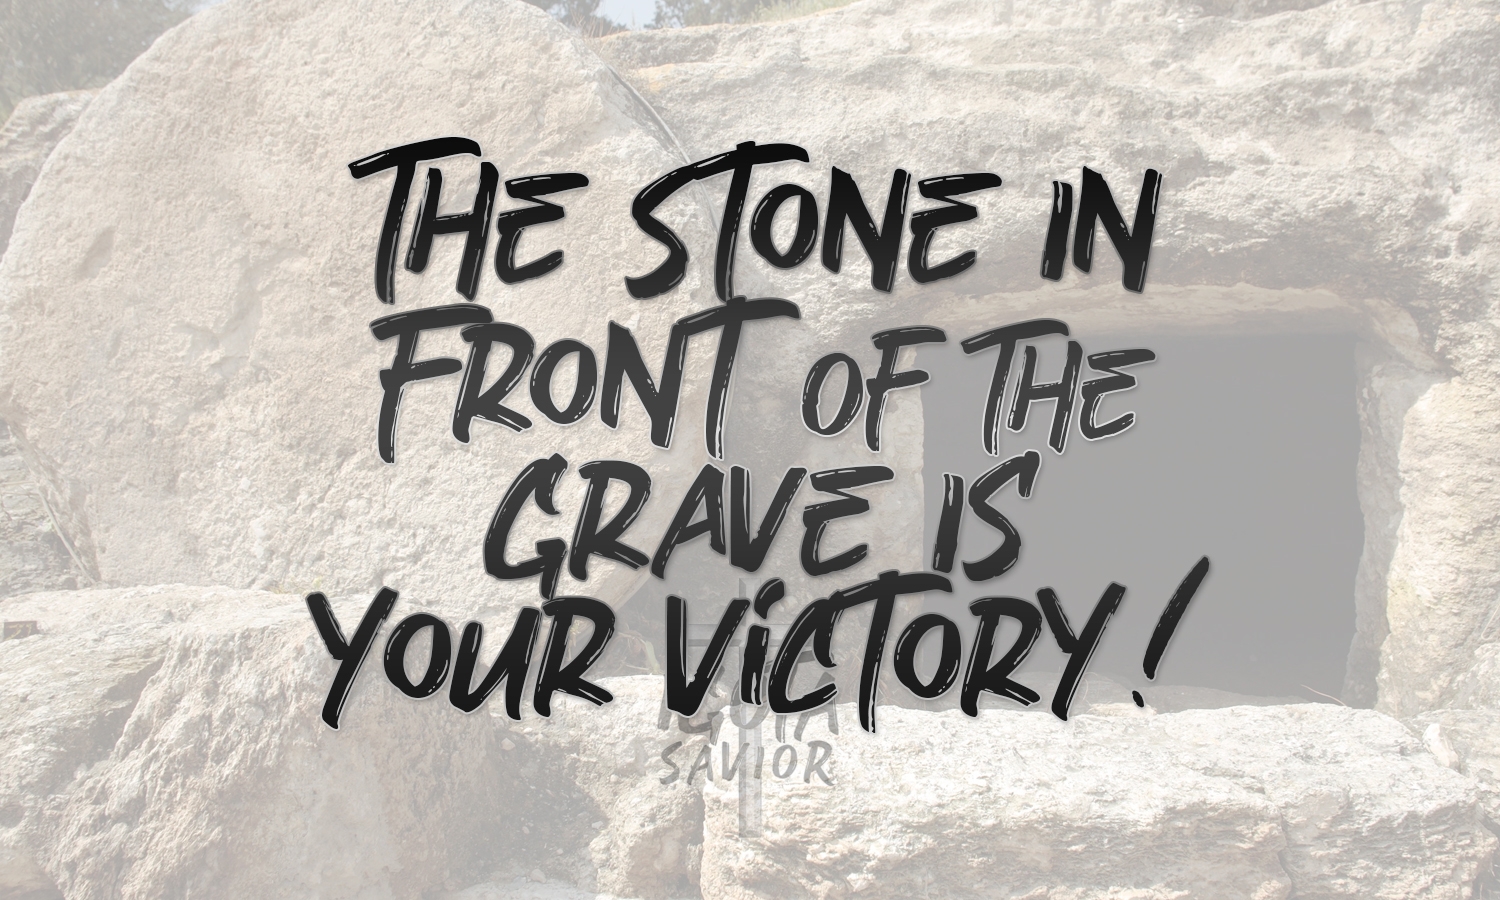 The Stone In Front Of The Grave Is Your Victory!